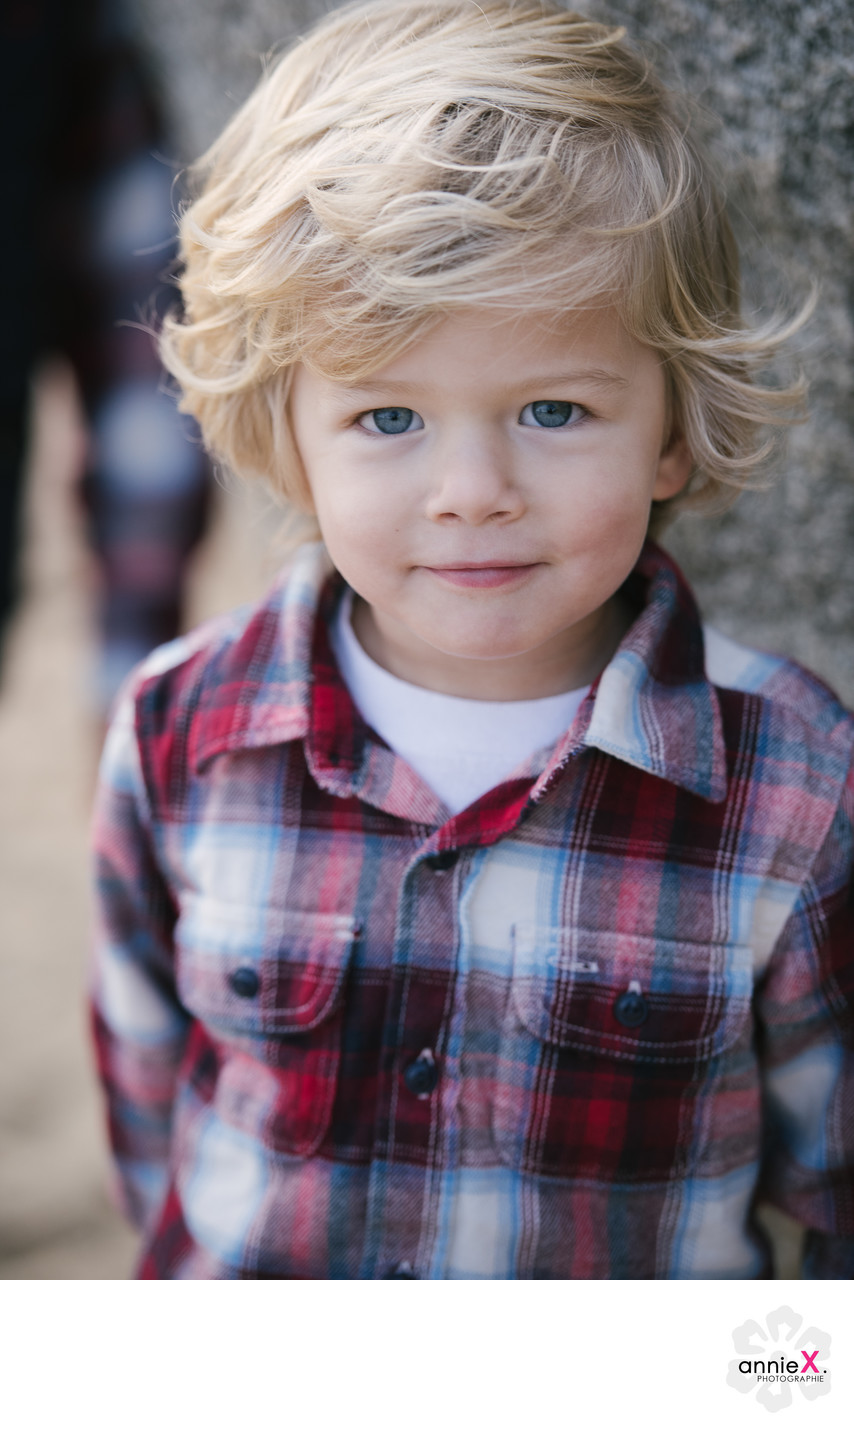 Boy in Paid family photographer